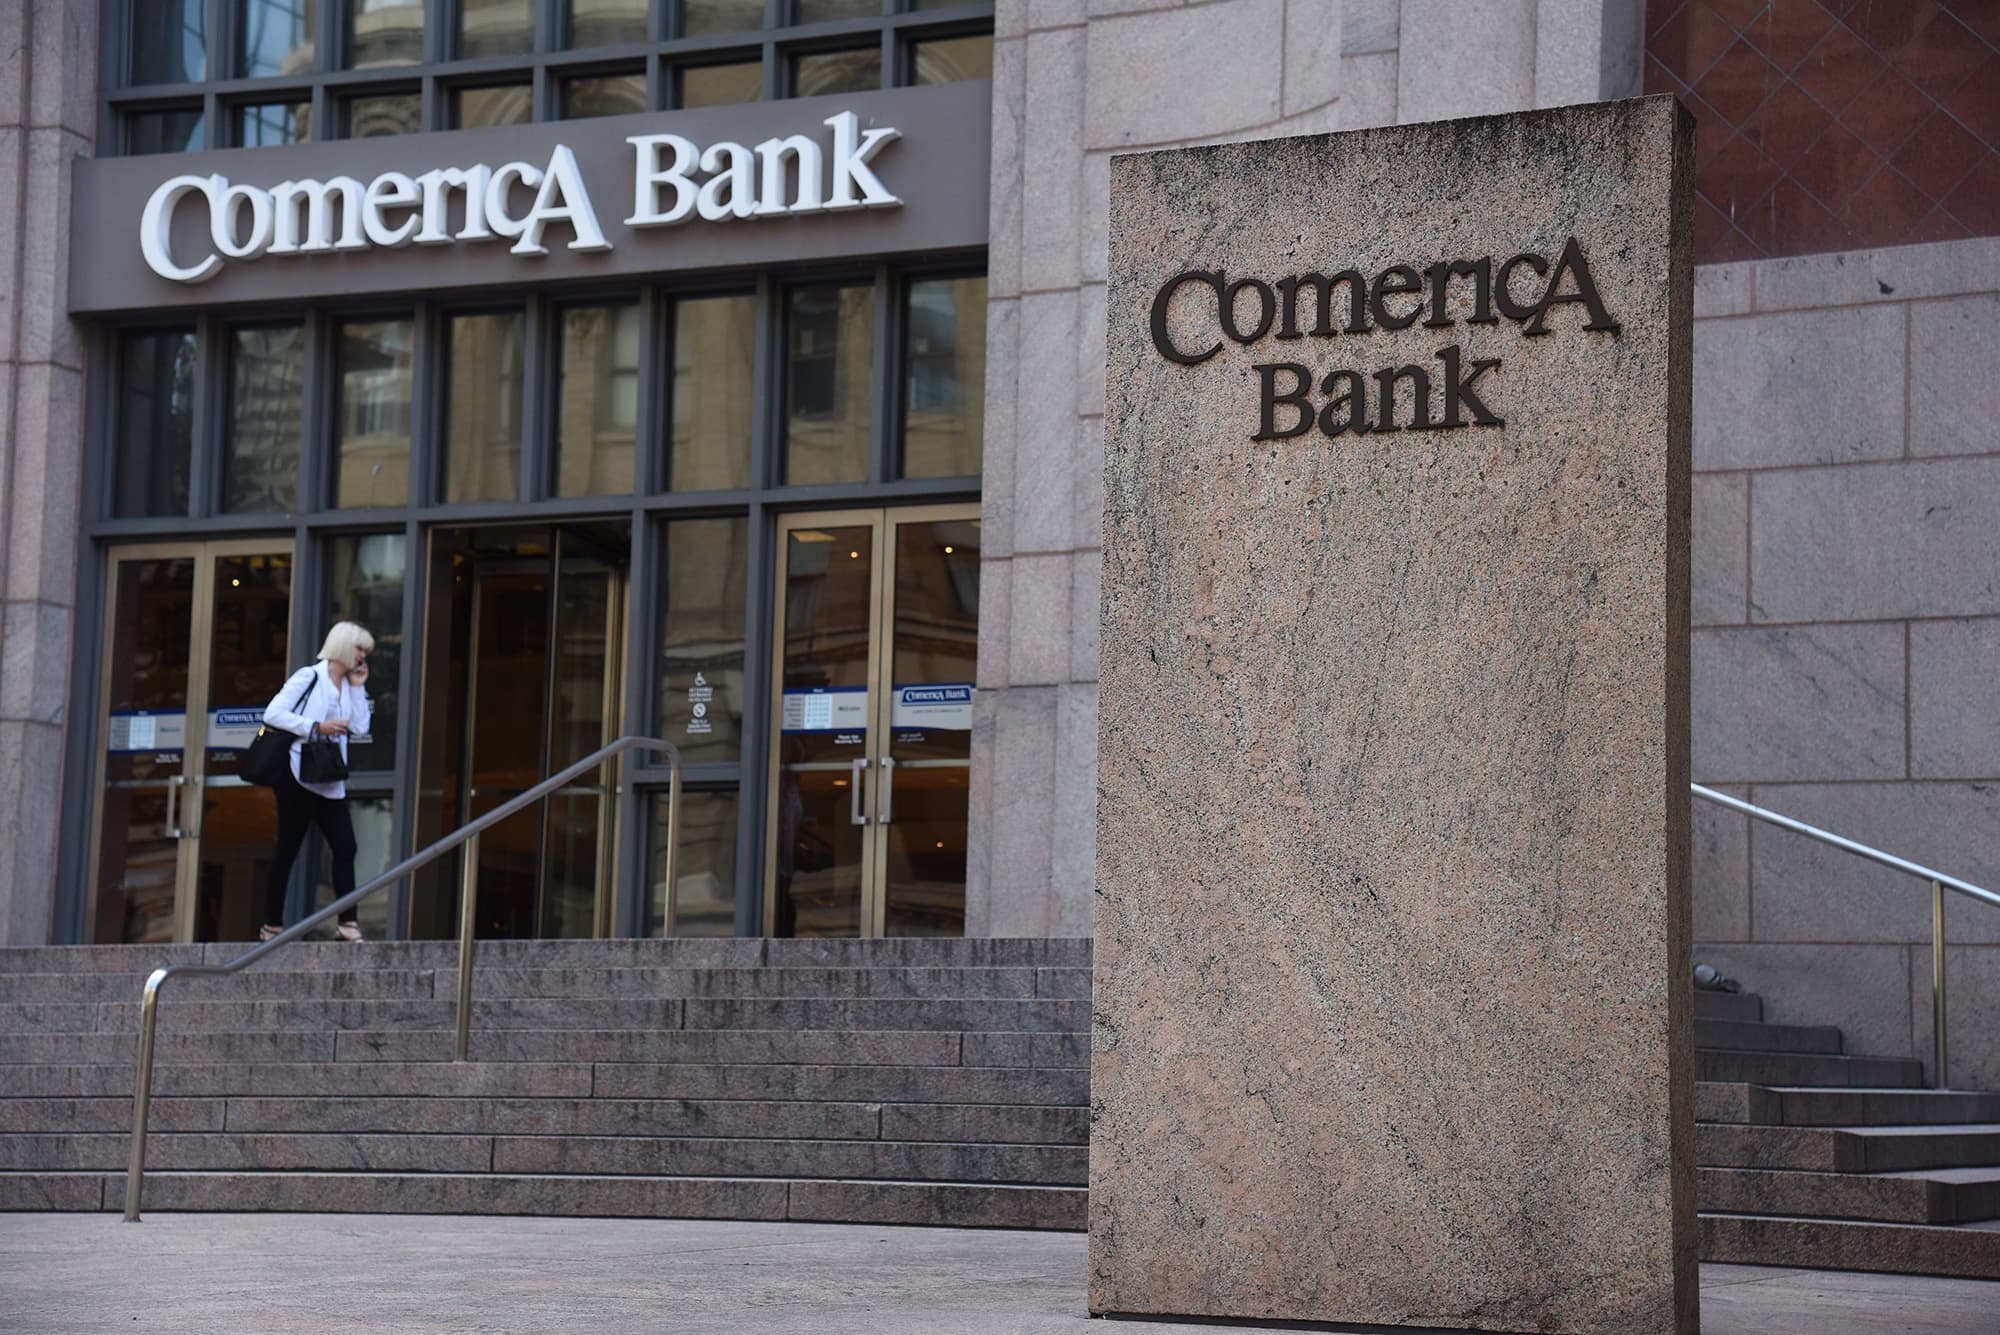 Bank stock Comerica can jump more than 20% from current levels, Raymond James says in upgrade